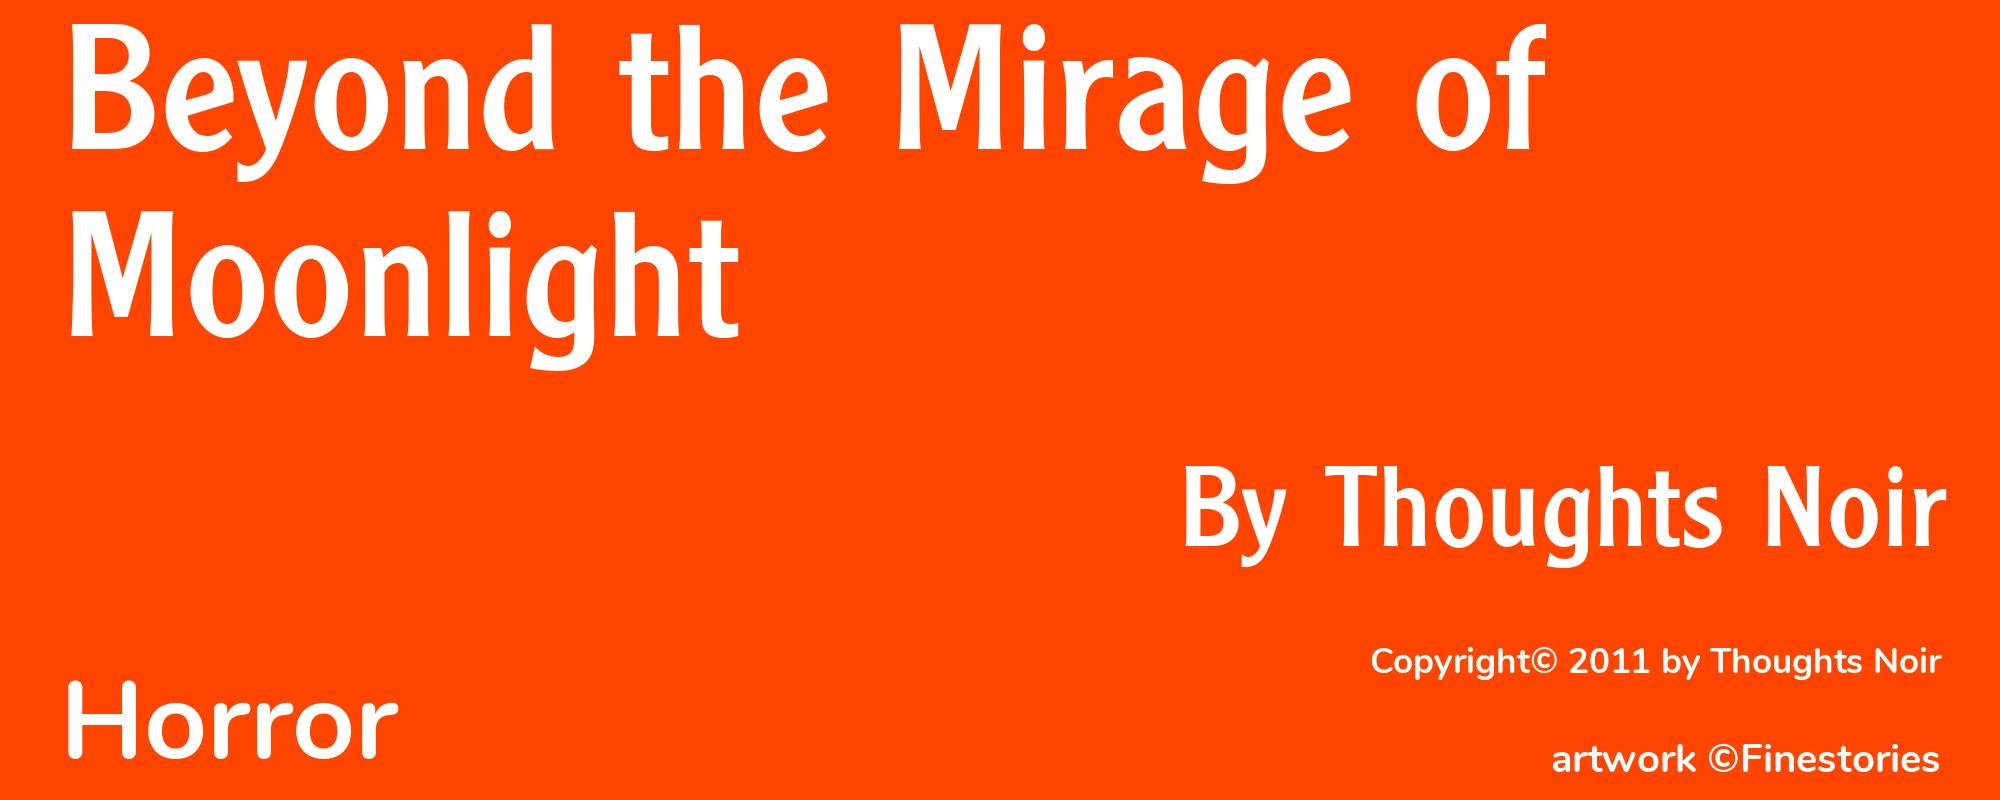 Beyond the Mirage of Moonlight - Cover